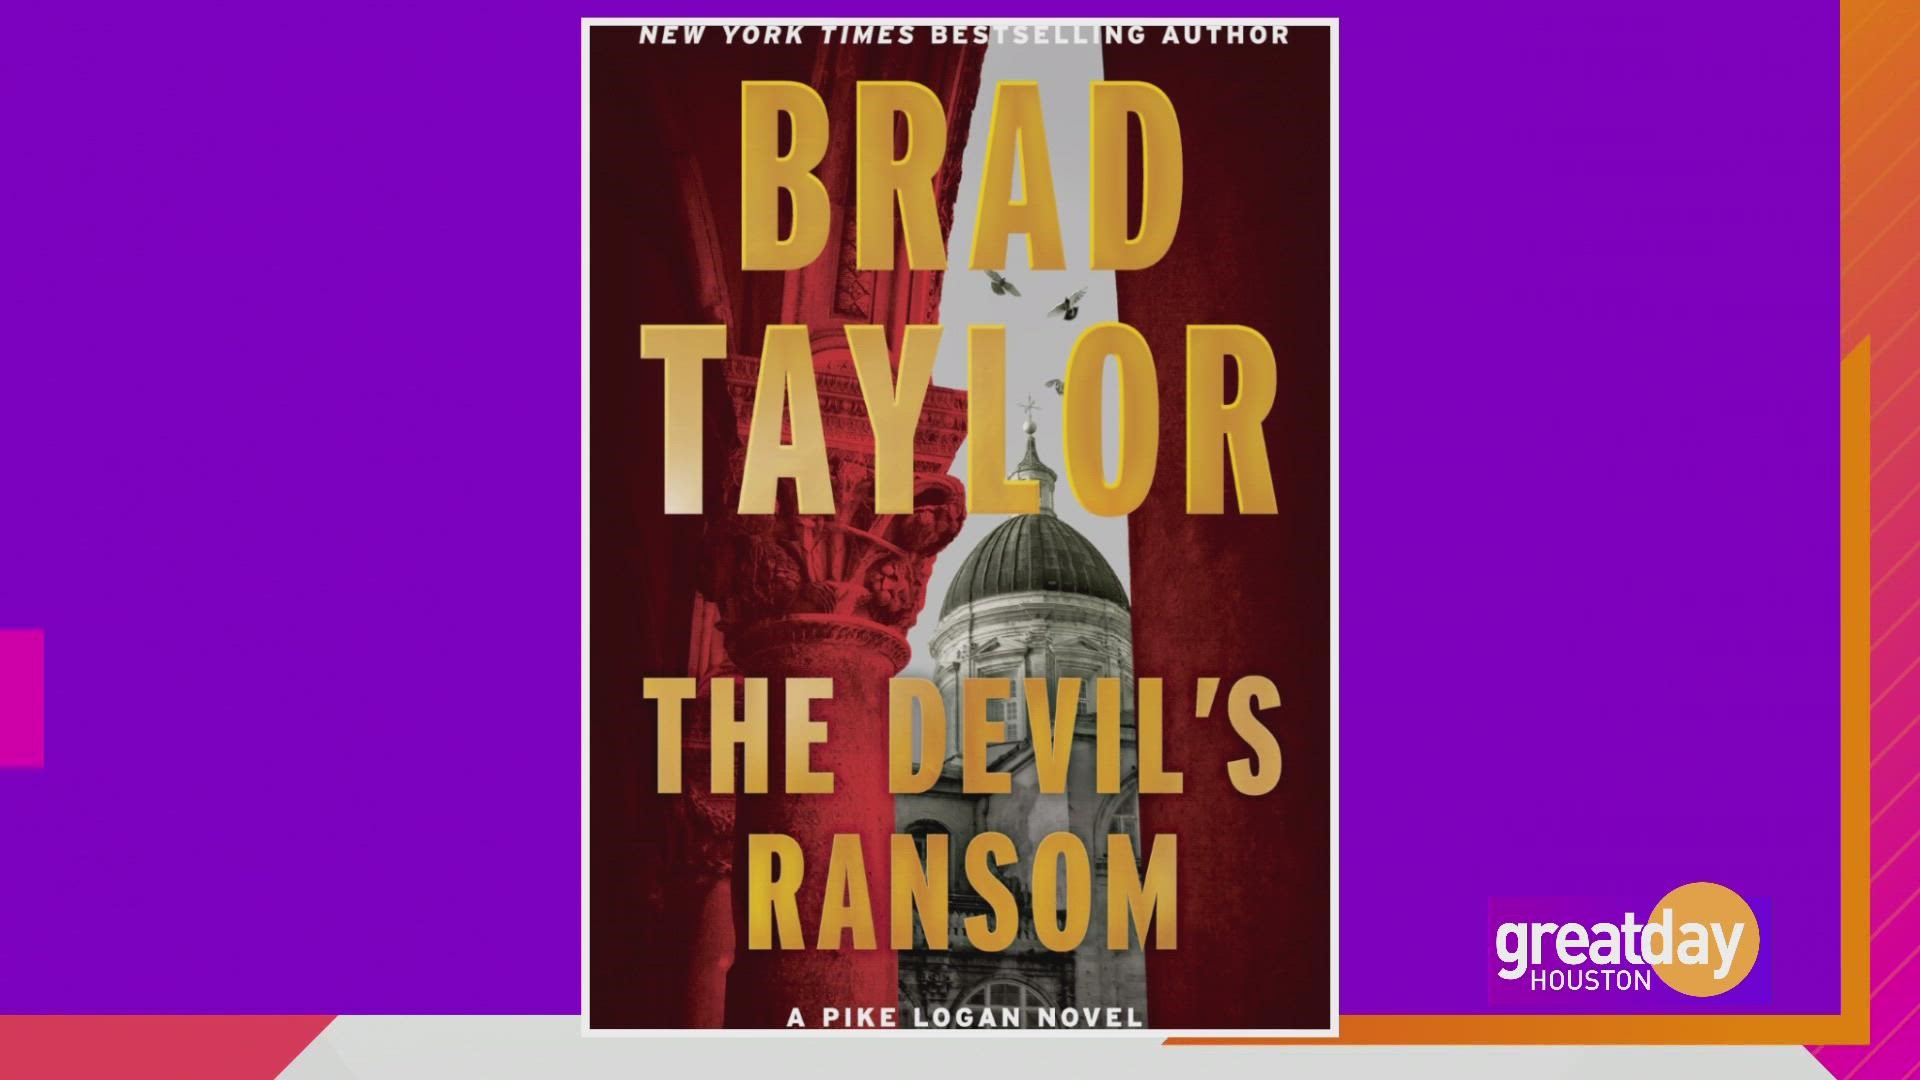 New York Times bestselling author, former Special Forces officer, Brad Taylor, discusses his newest thriller in the Pike Logan Series, "The Devil's Ransom."